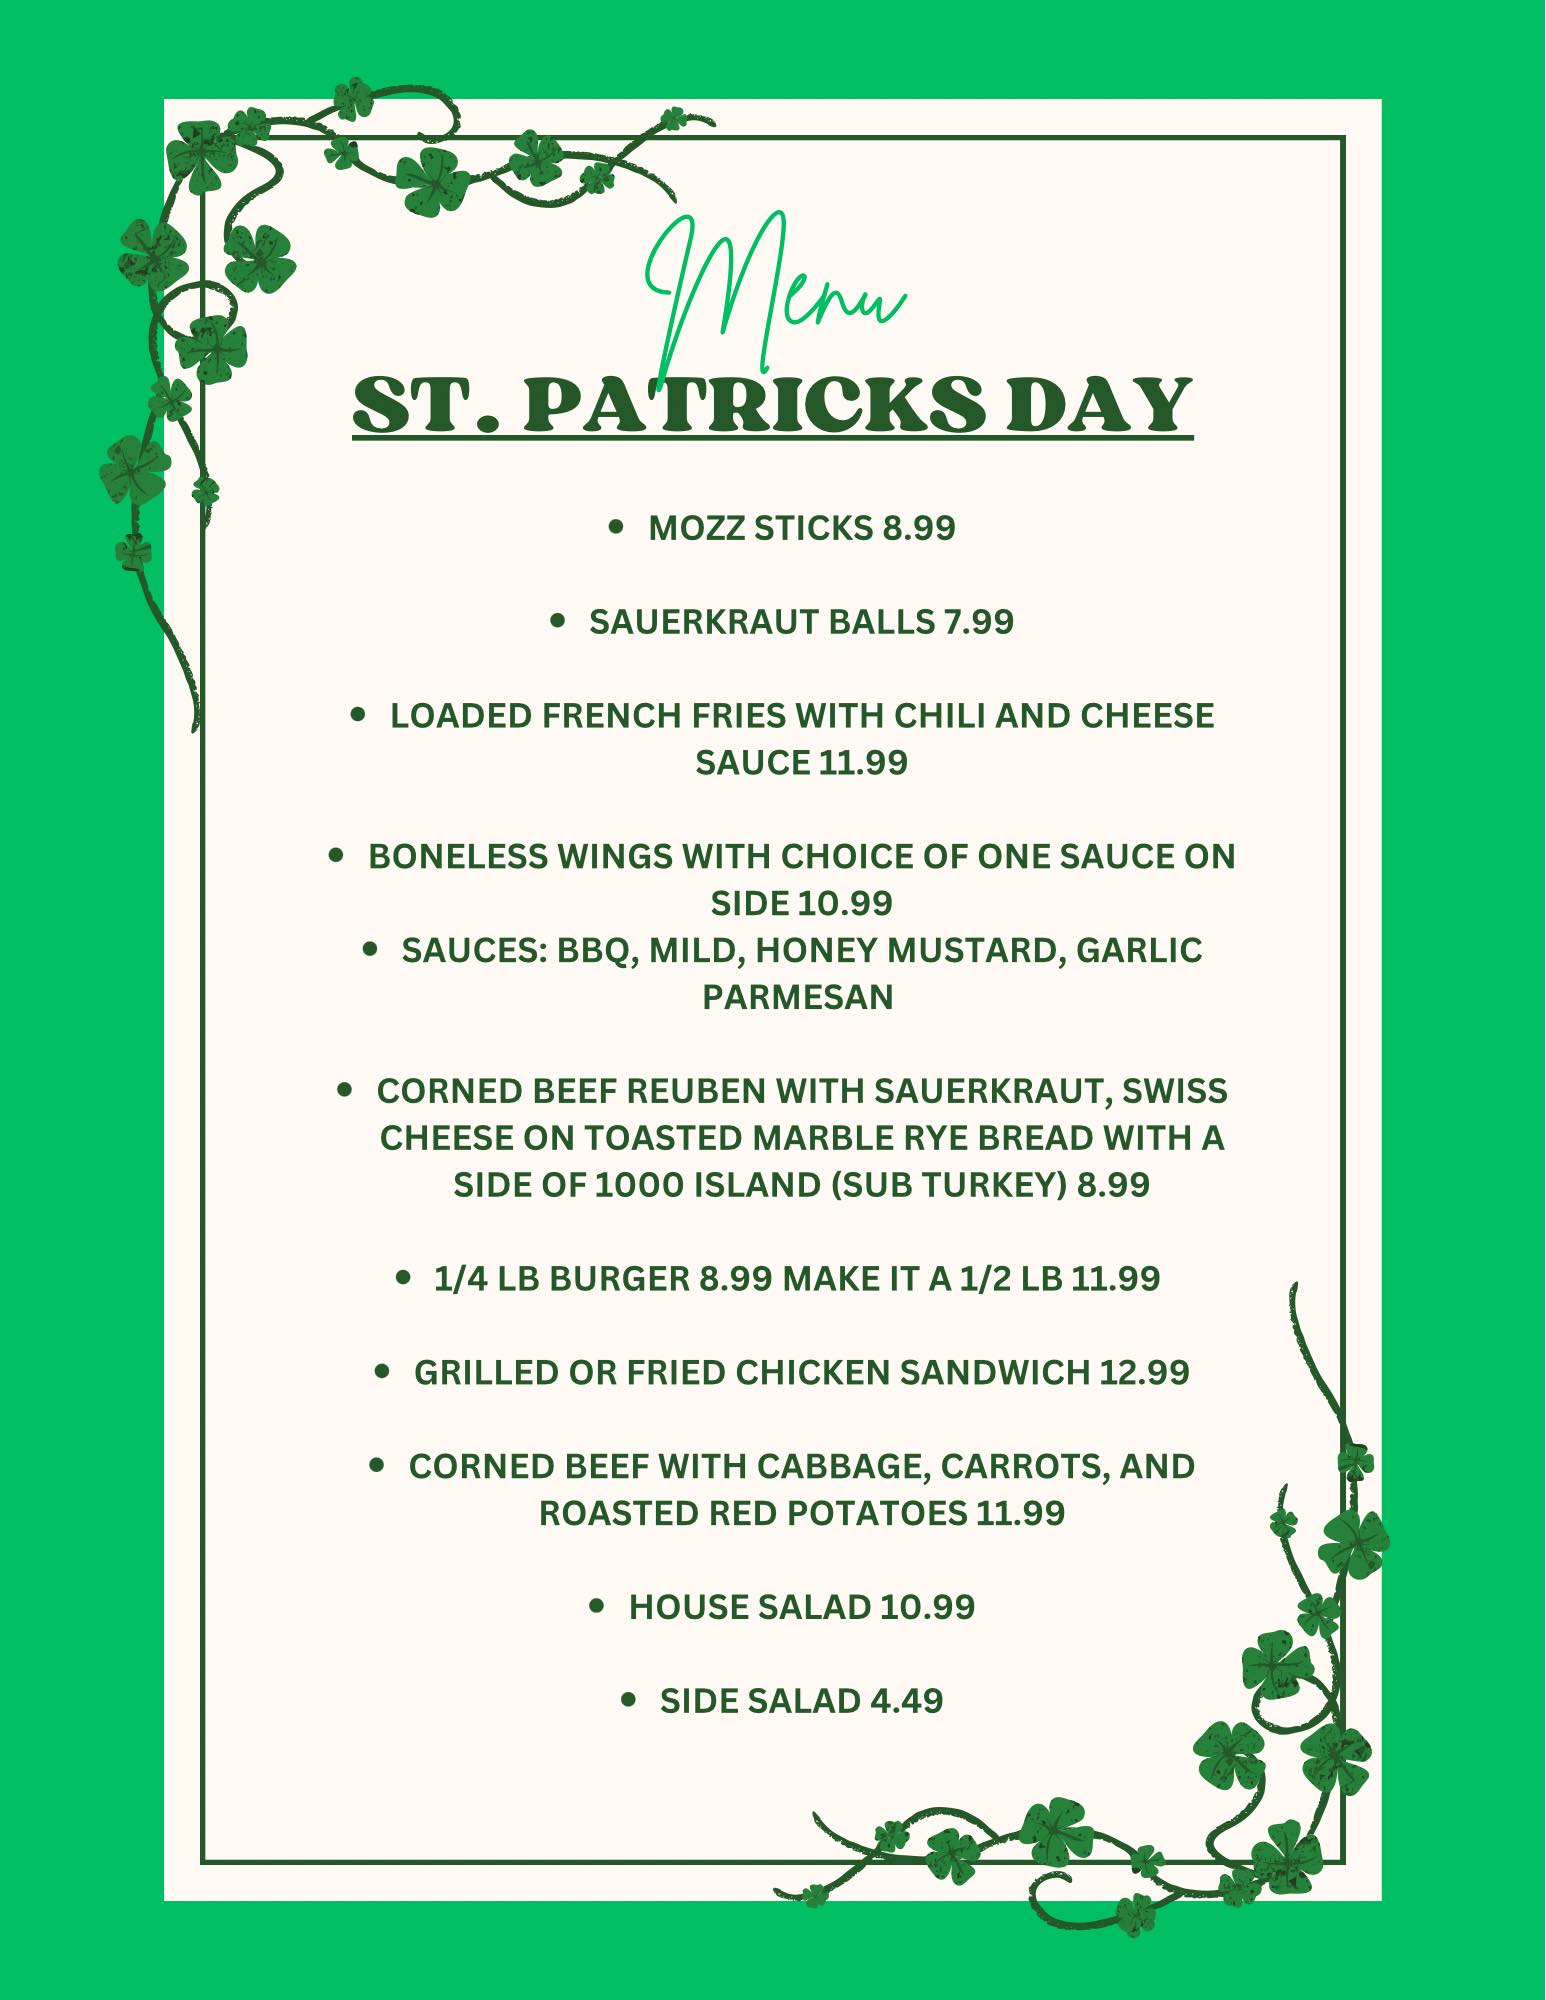 St. Patrick's Day Specials at Upper Deck